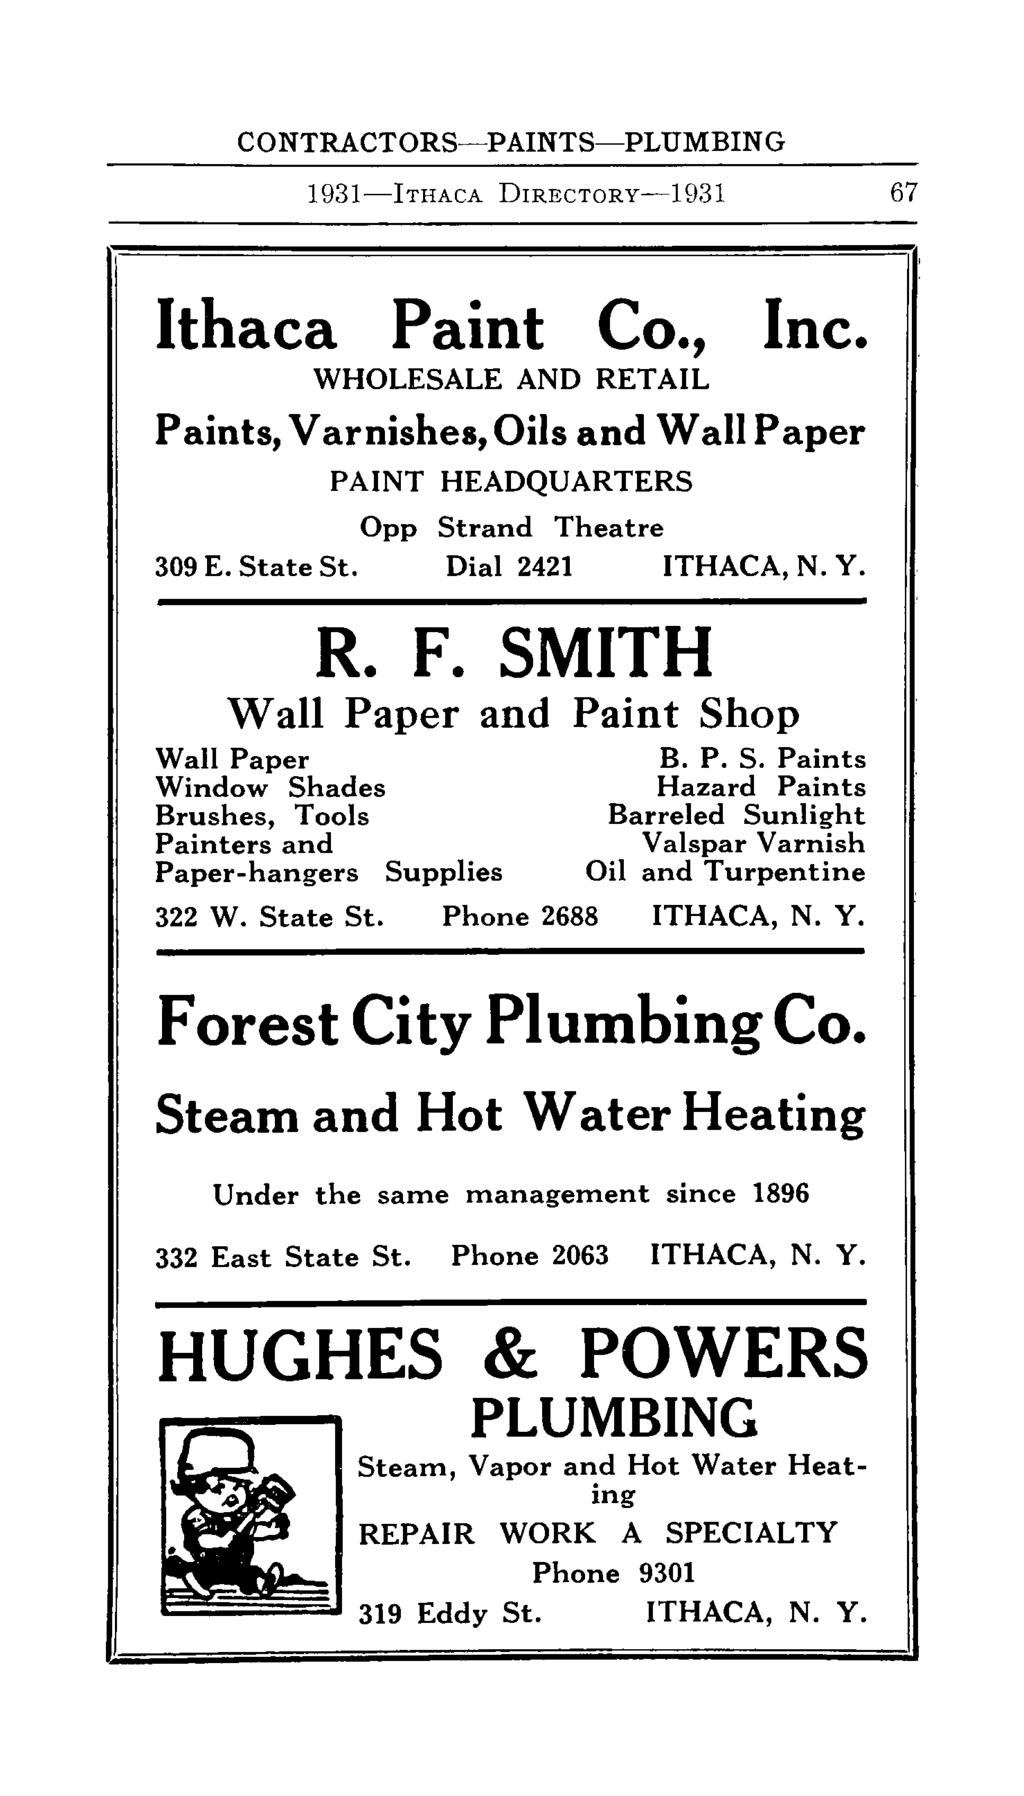 CONTRACTORS-PAINTS-PLUMBING 1931-lTHAcA DIRECTORy-1931 67 Ithaca Paint Co., Inc. WHOLESALE AND RETAIL Paints, Varnishes,Oils and WallPaper PAINT HEADQUARTERS Opp Strand Theatre 309 E. StateSt.